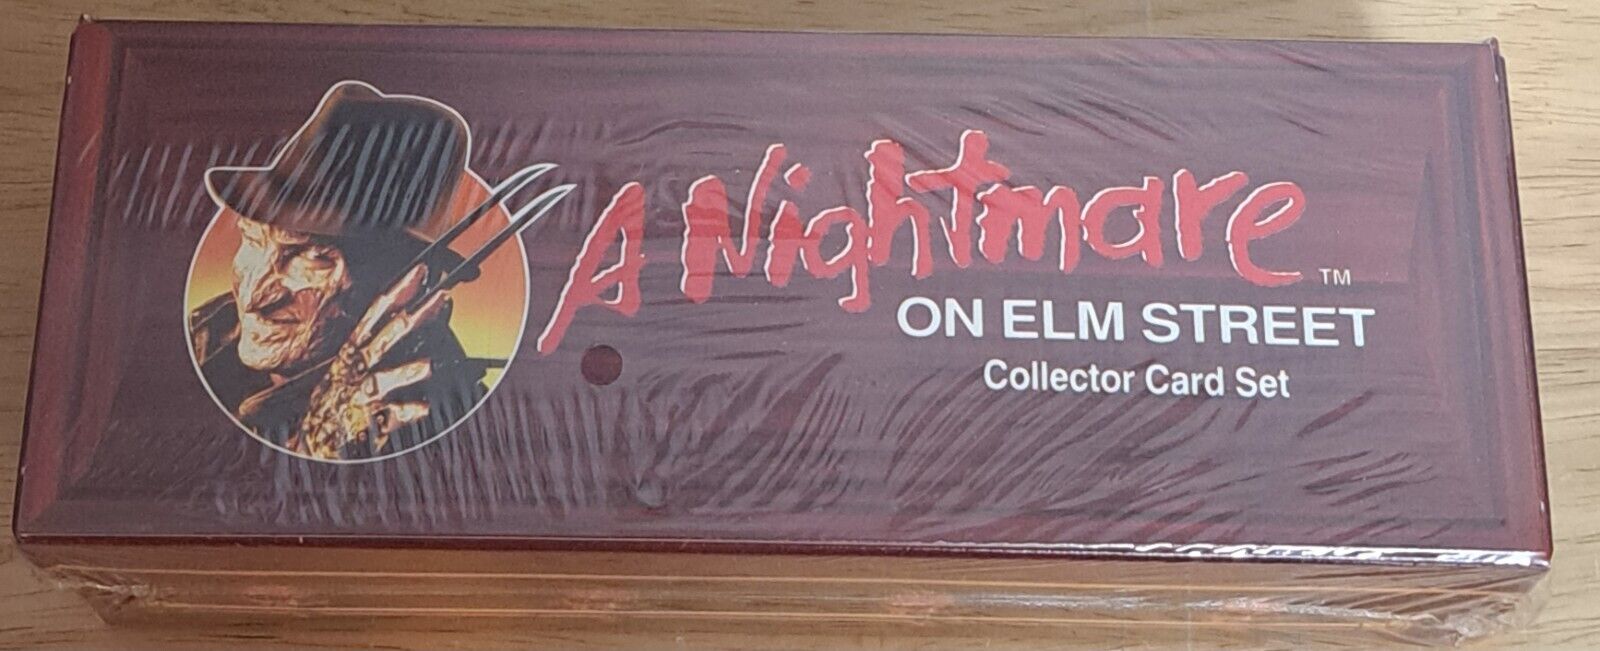 1991 A NIGHTMARE ON ELM STREET COFFIN FACTORY SET SEALED